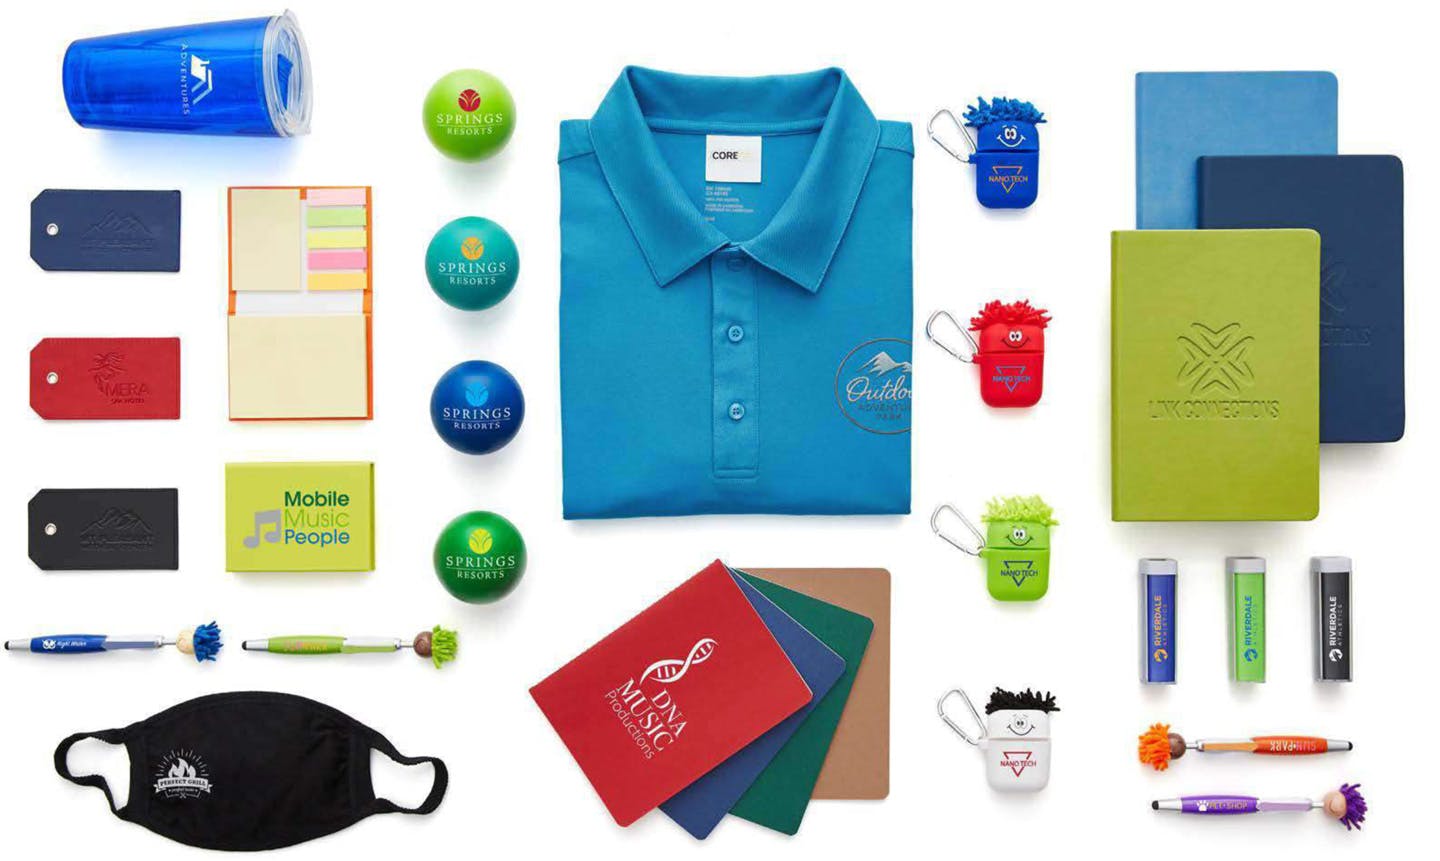 A perfectly laid out collection of promotional products from pens to letterhead